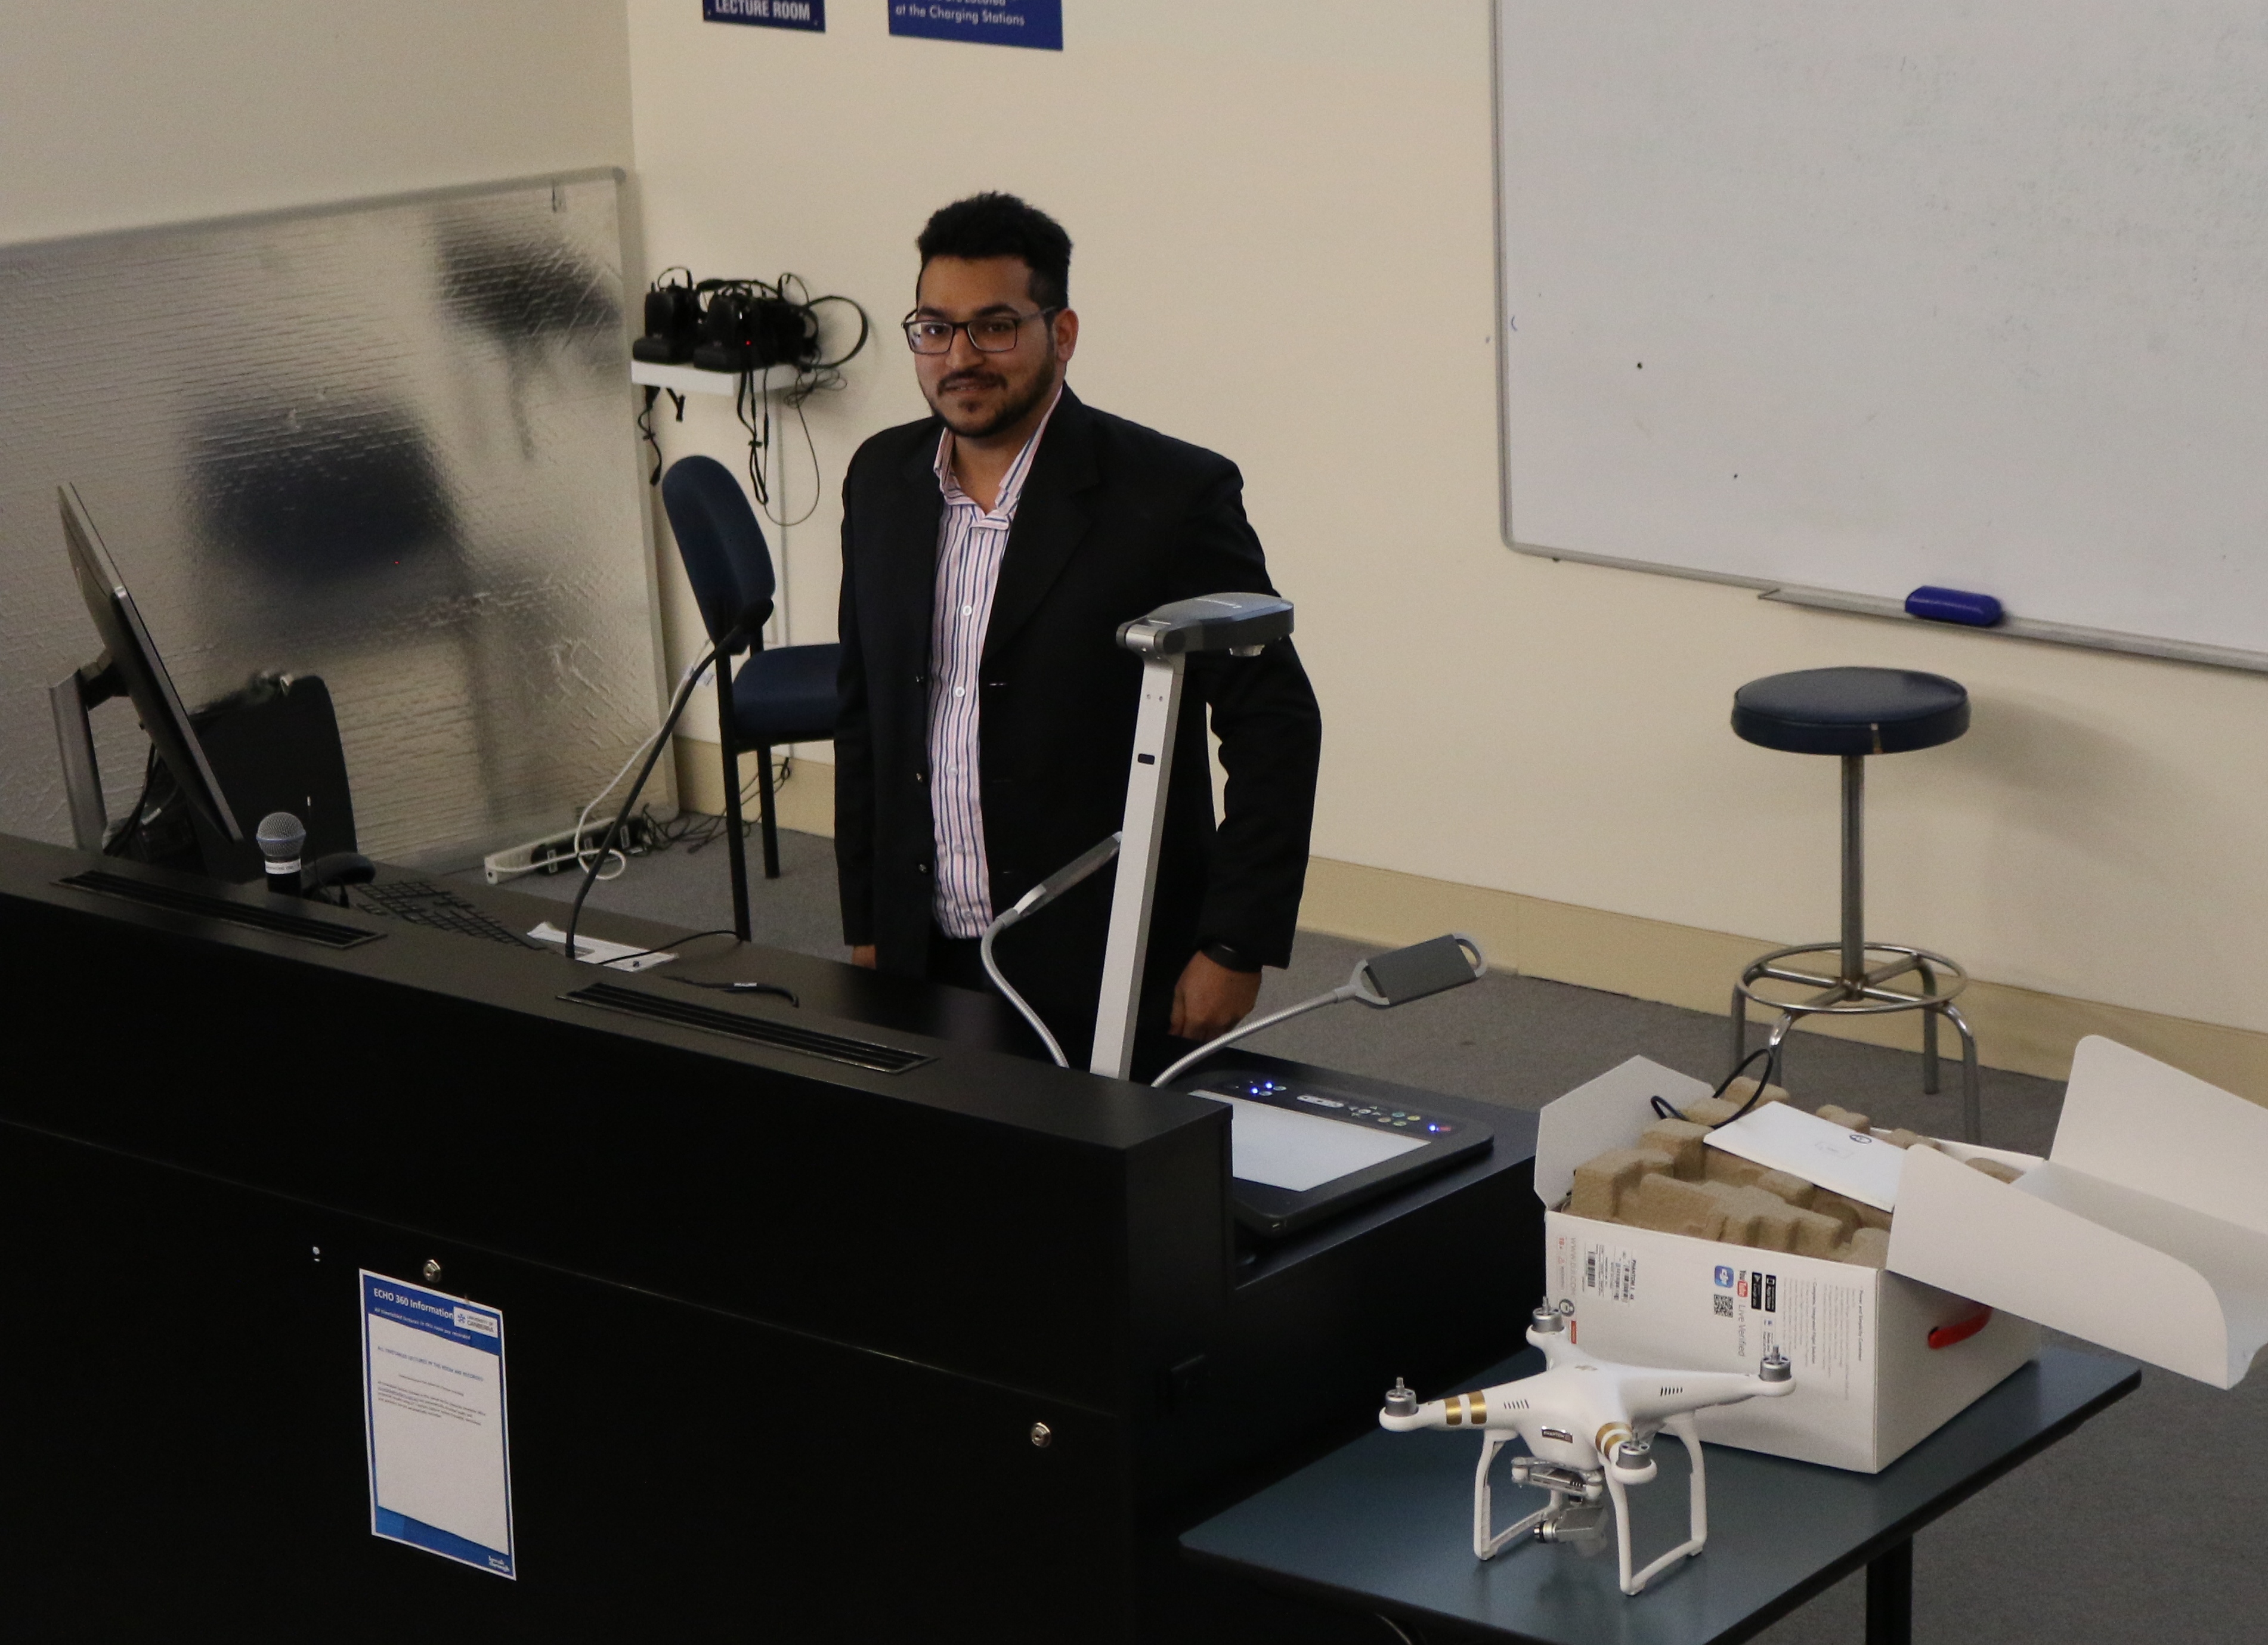 Mohammed Nizamuddin Rizwan delivers his WRS Presentation, one of the drones he used in his research sits on the desk